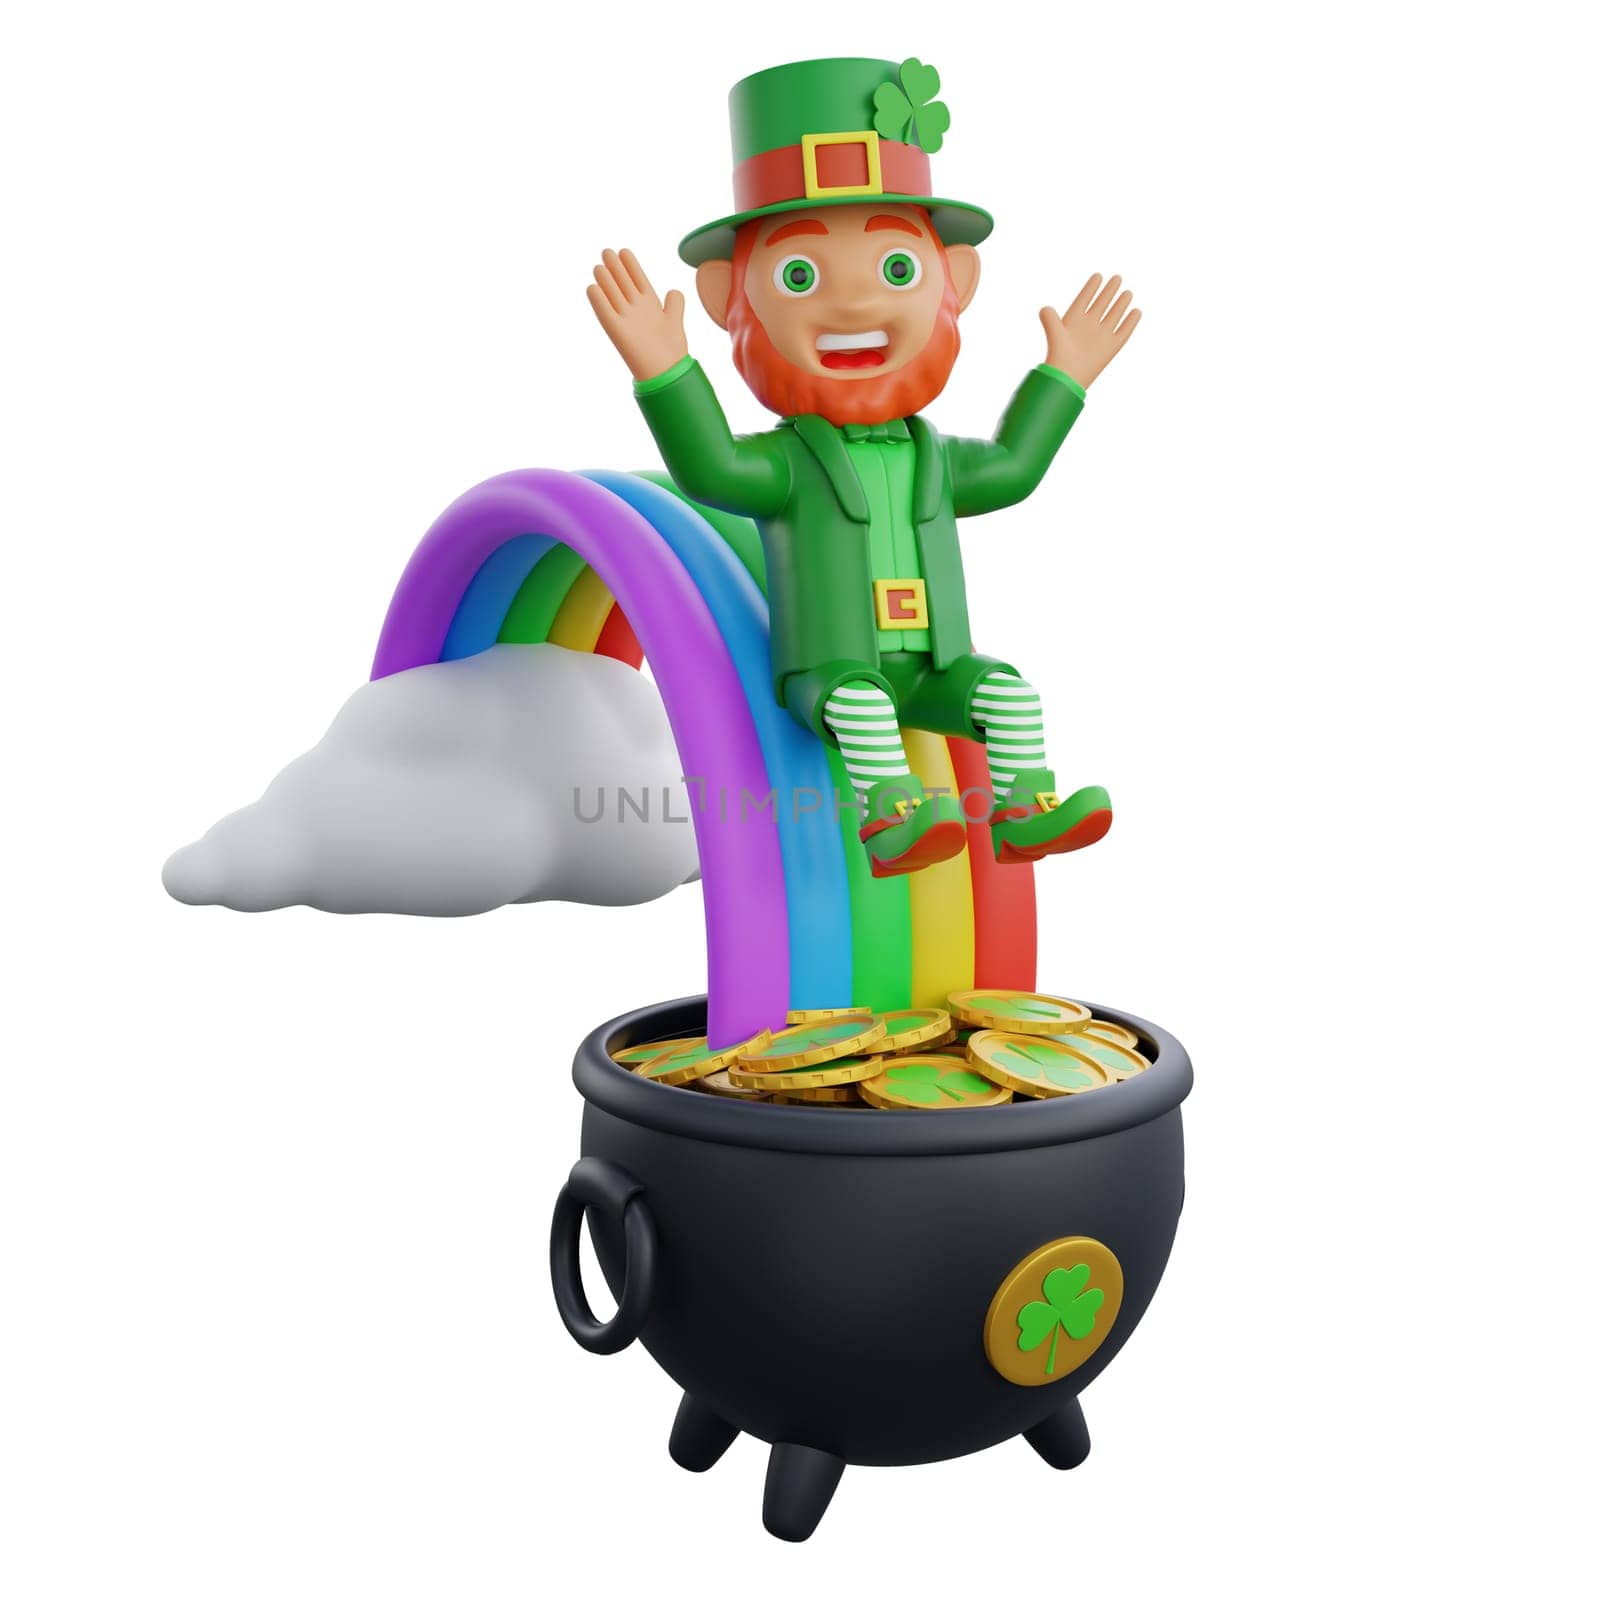 3D illustration of a cheerful leprechaun leaping over a rainbow, with a pot of gold coins at the end, perfect for St. Patrick's Day themed projects